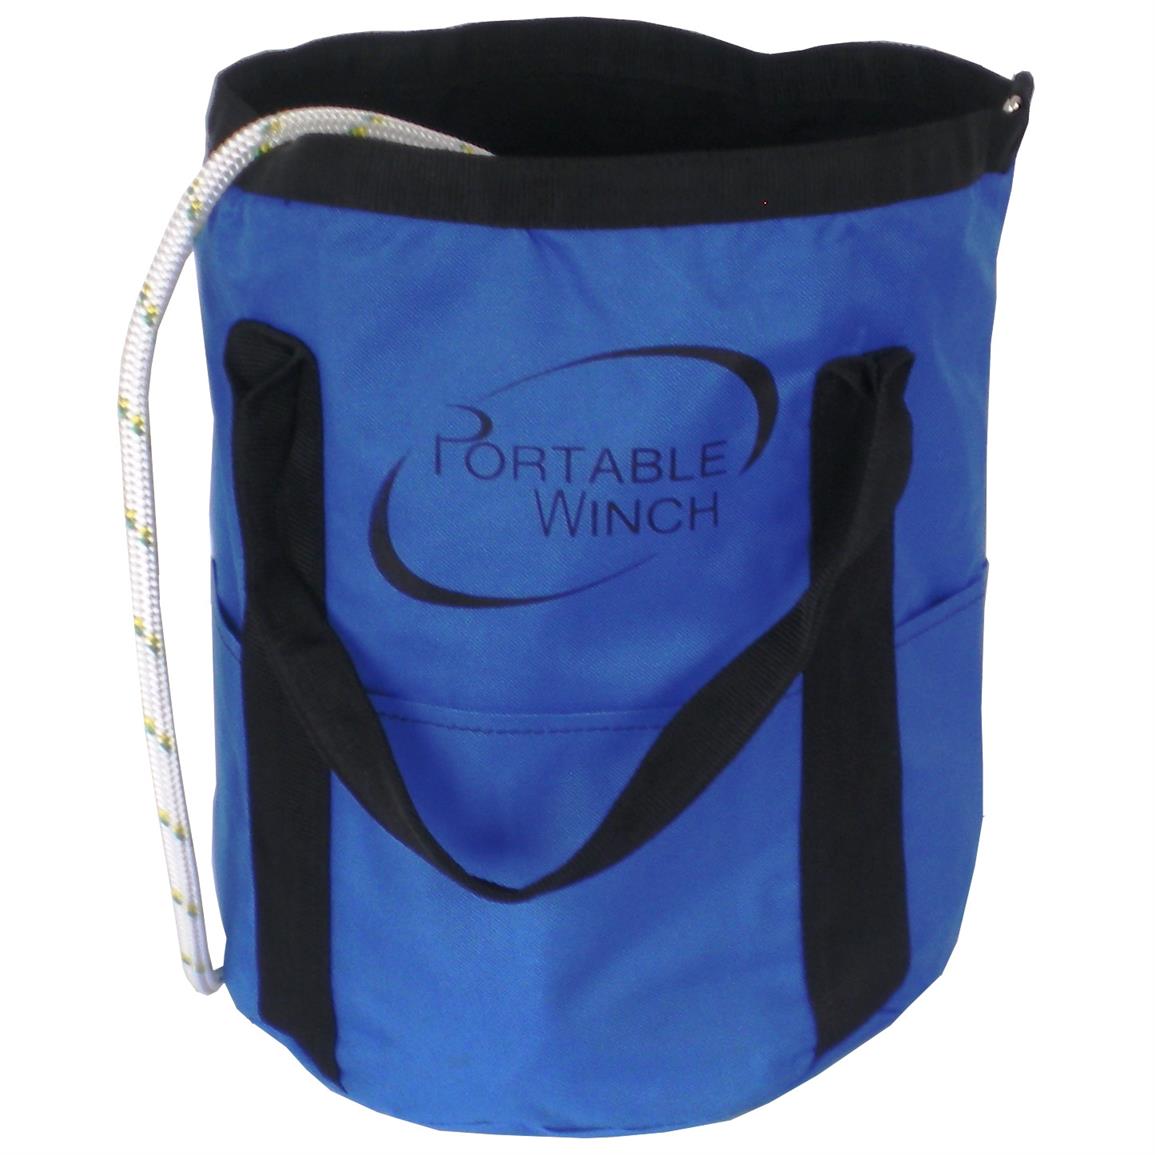 Portable Winch Co. Small Rope Bag